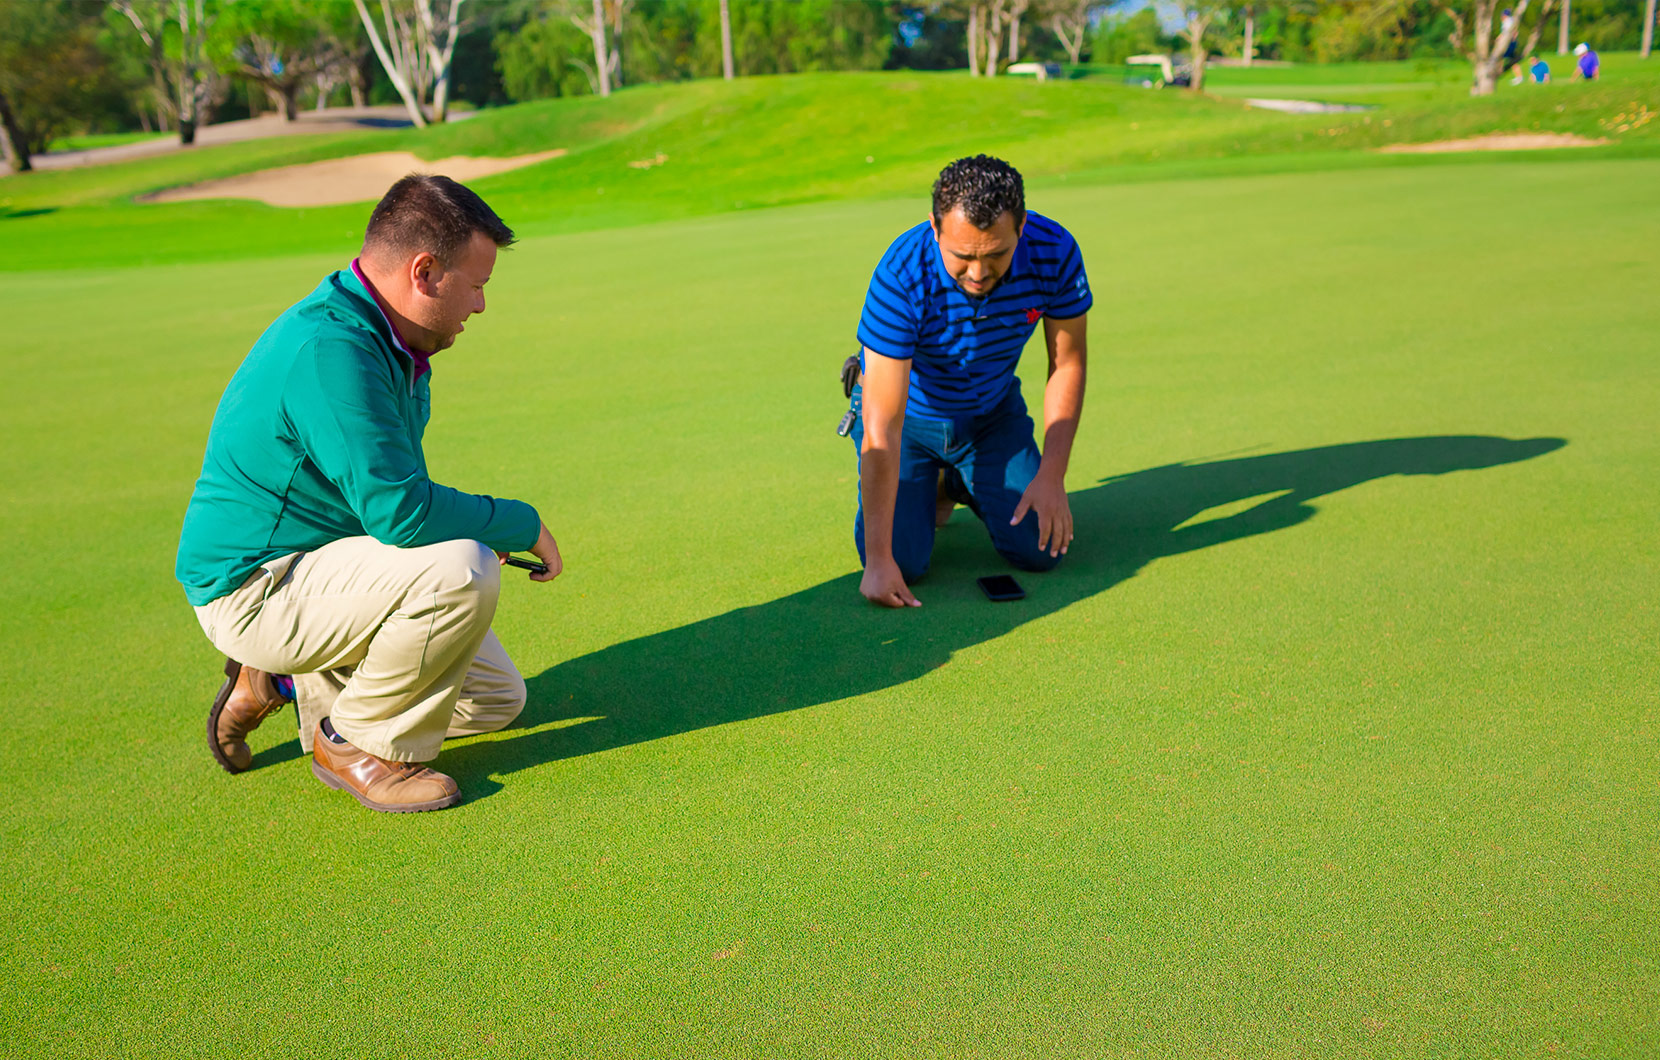 Shane oversees the planting and maintenance of all the Vidanta Golf courses.